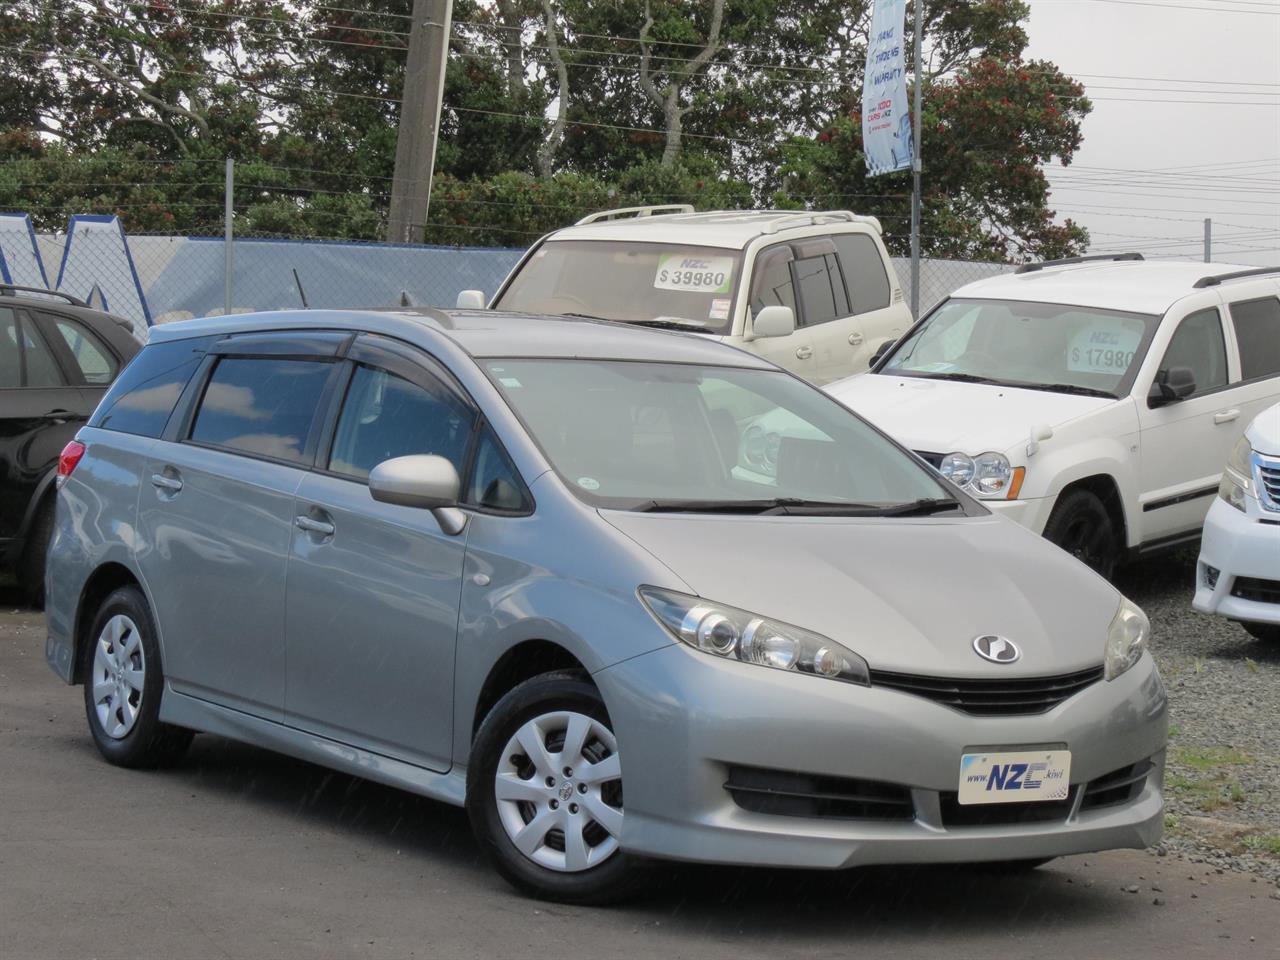 NZC 2011 Toyota Wish just arrived to Auckland